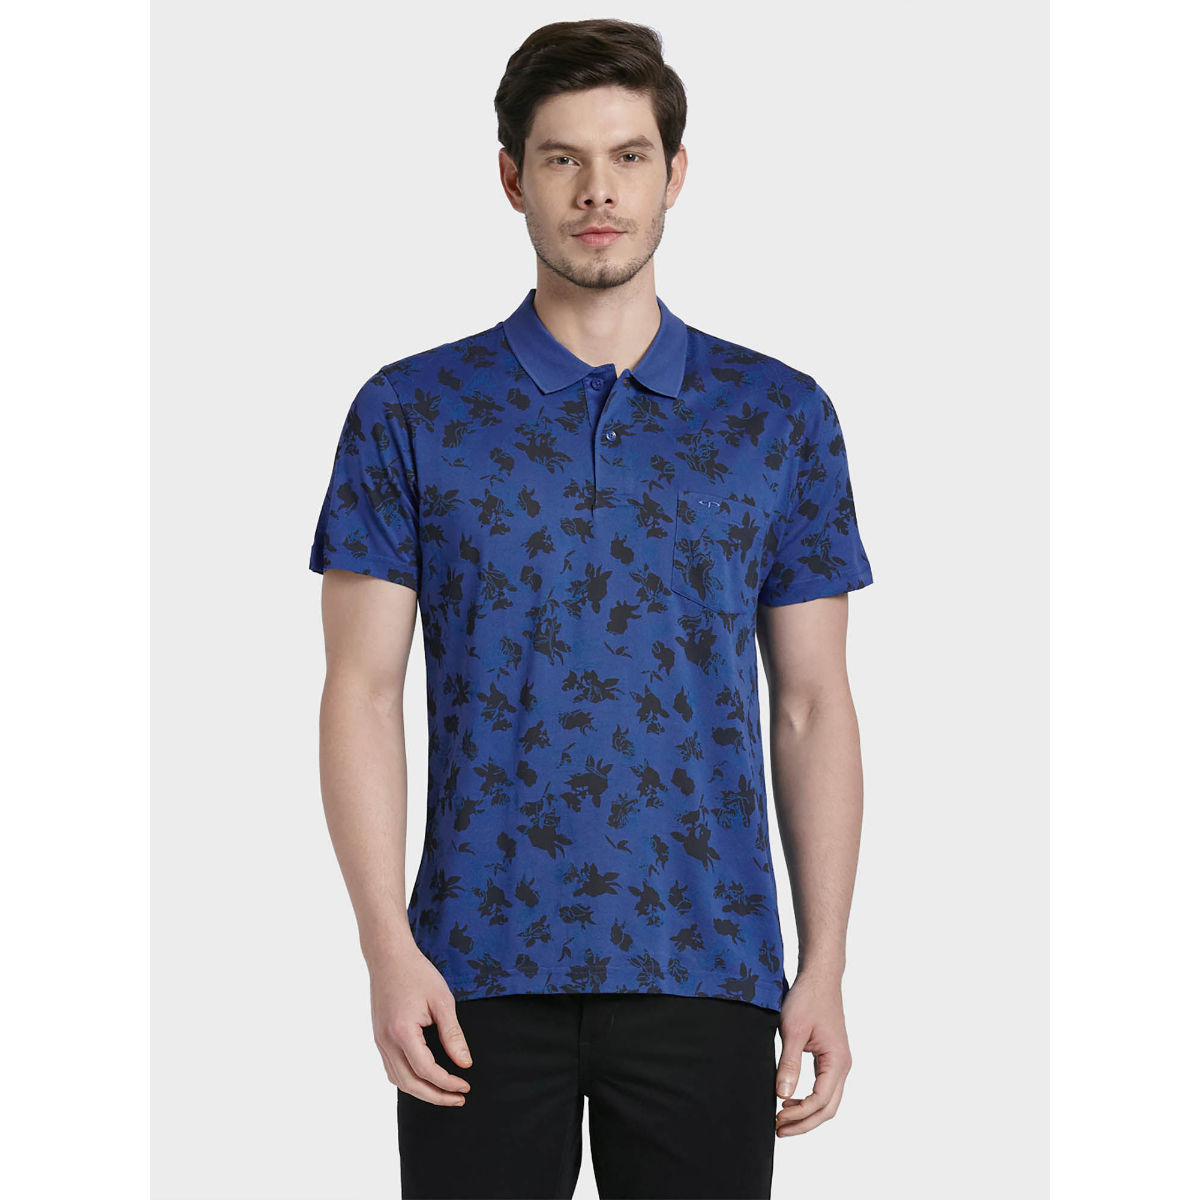 ColorPlus Navy Blue Printed T-Shirt (S)